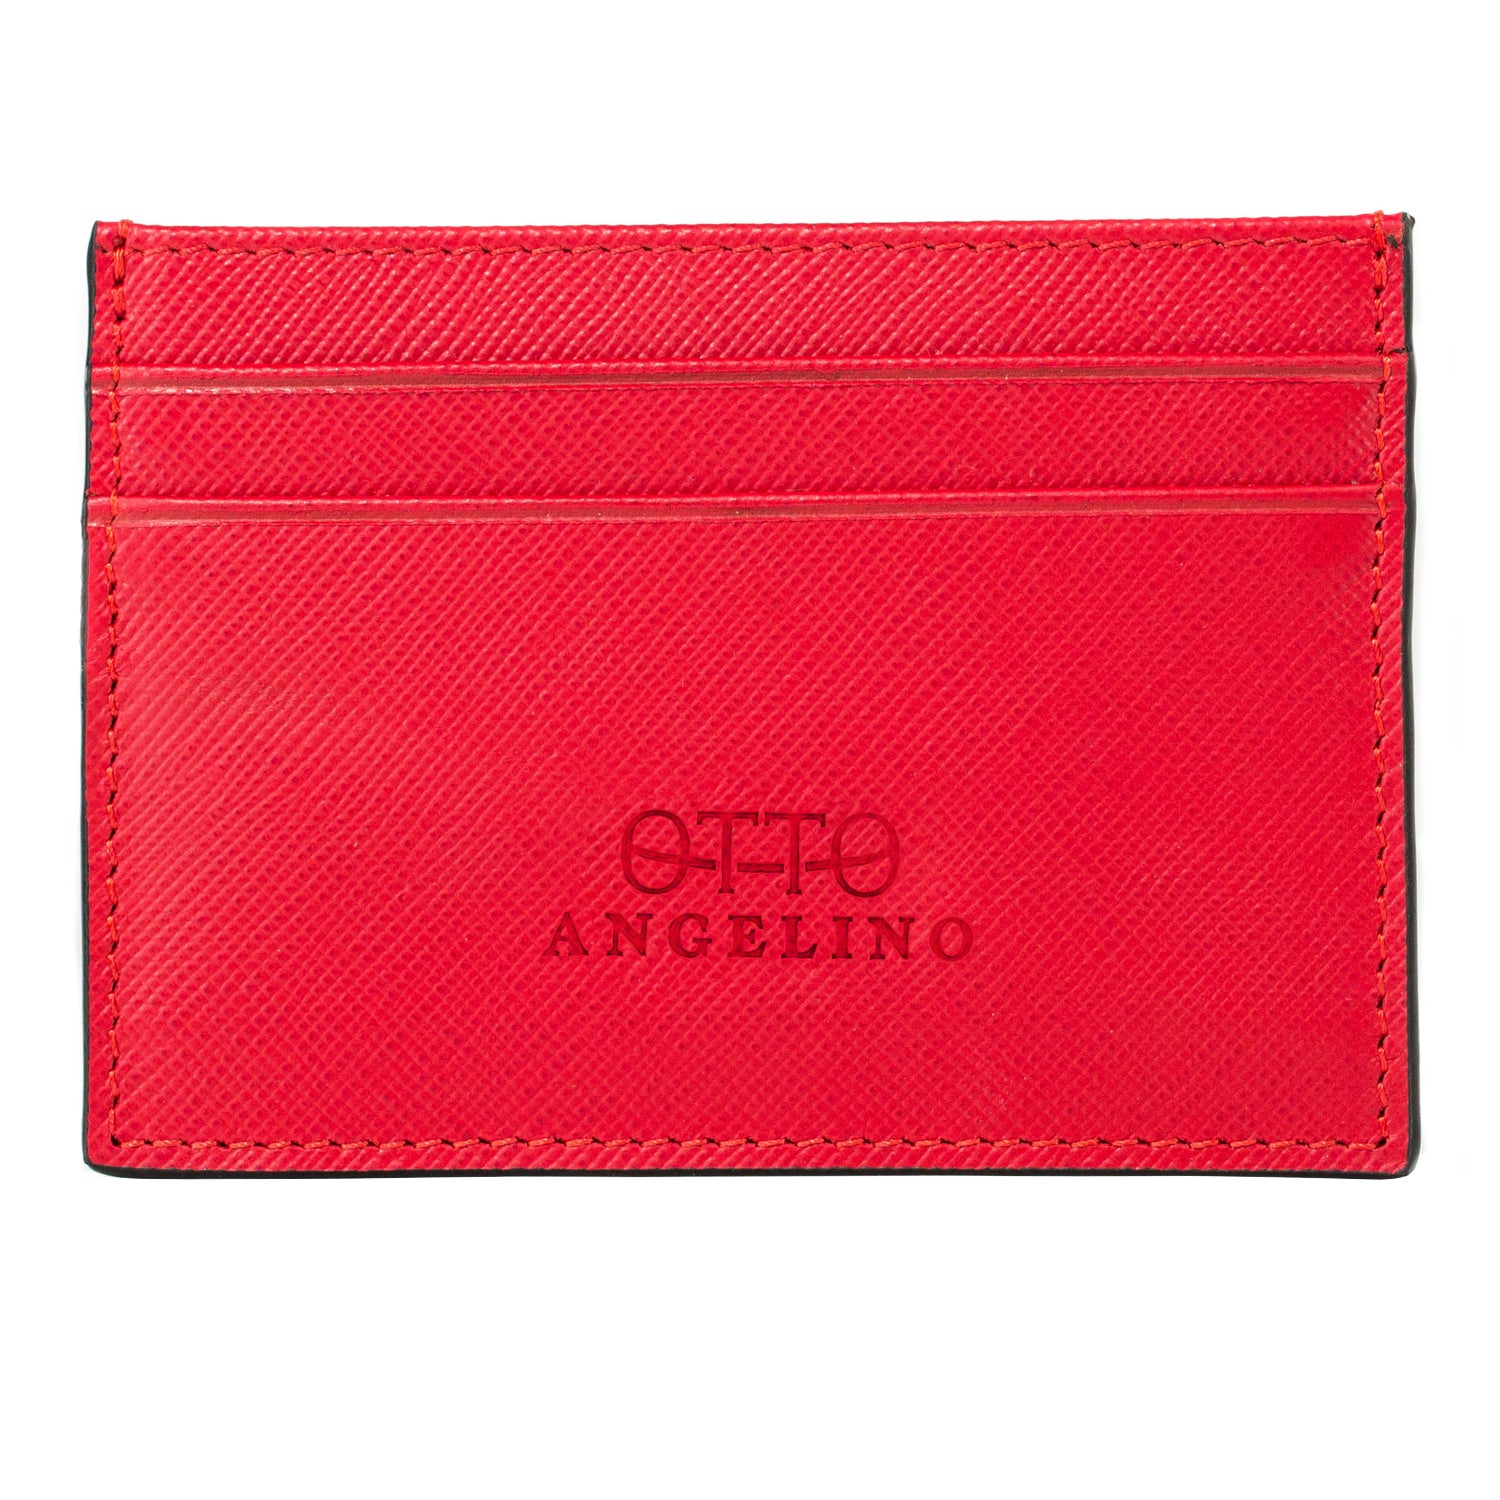 Card Holders & Wallets - Otto Angelino